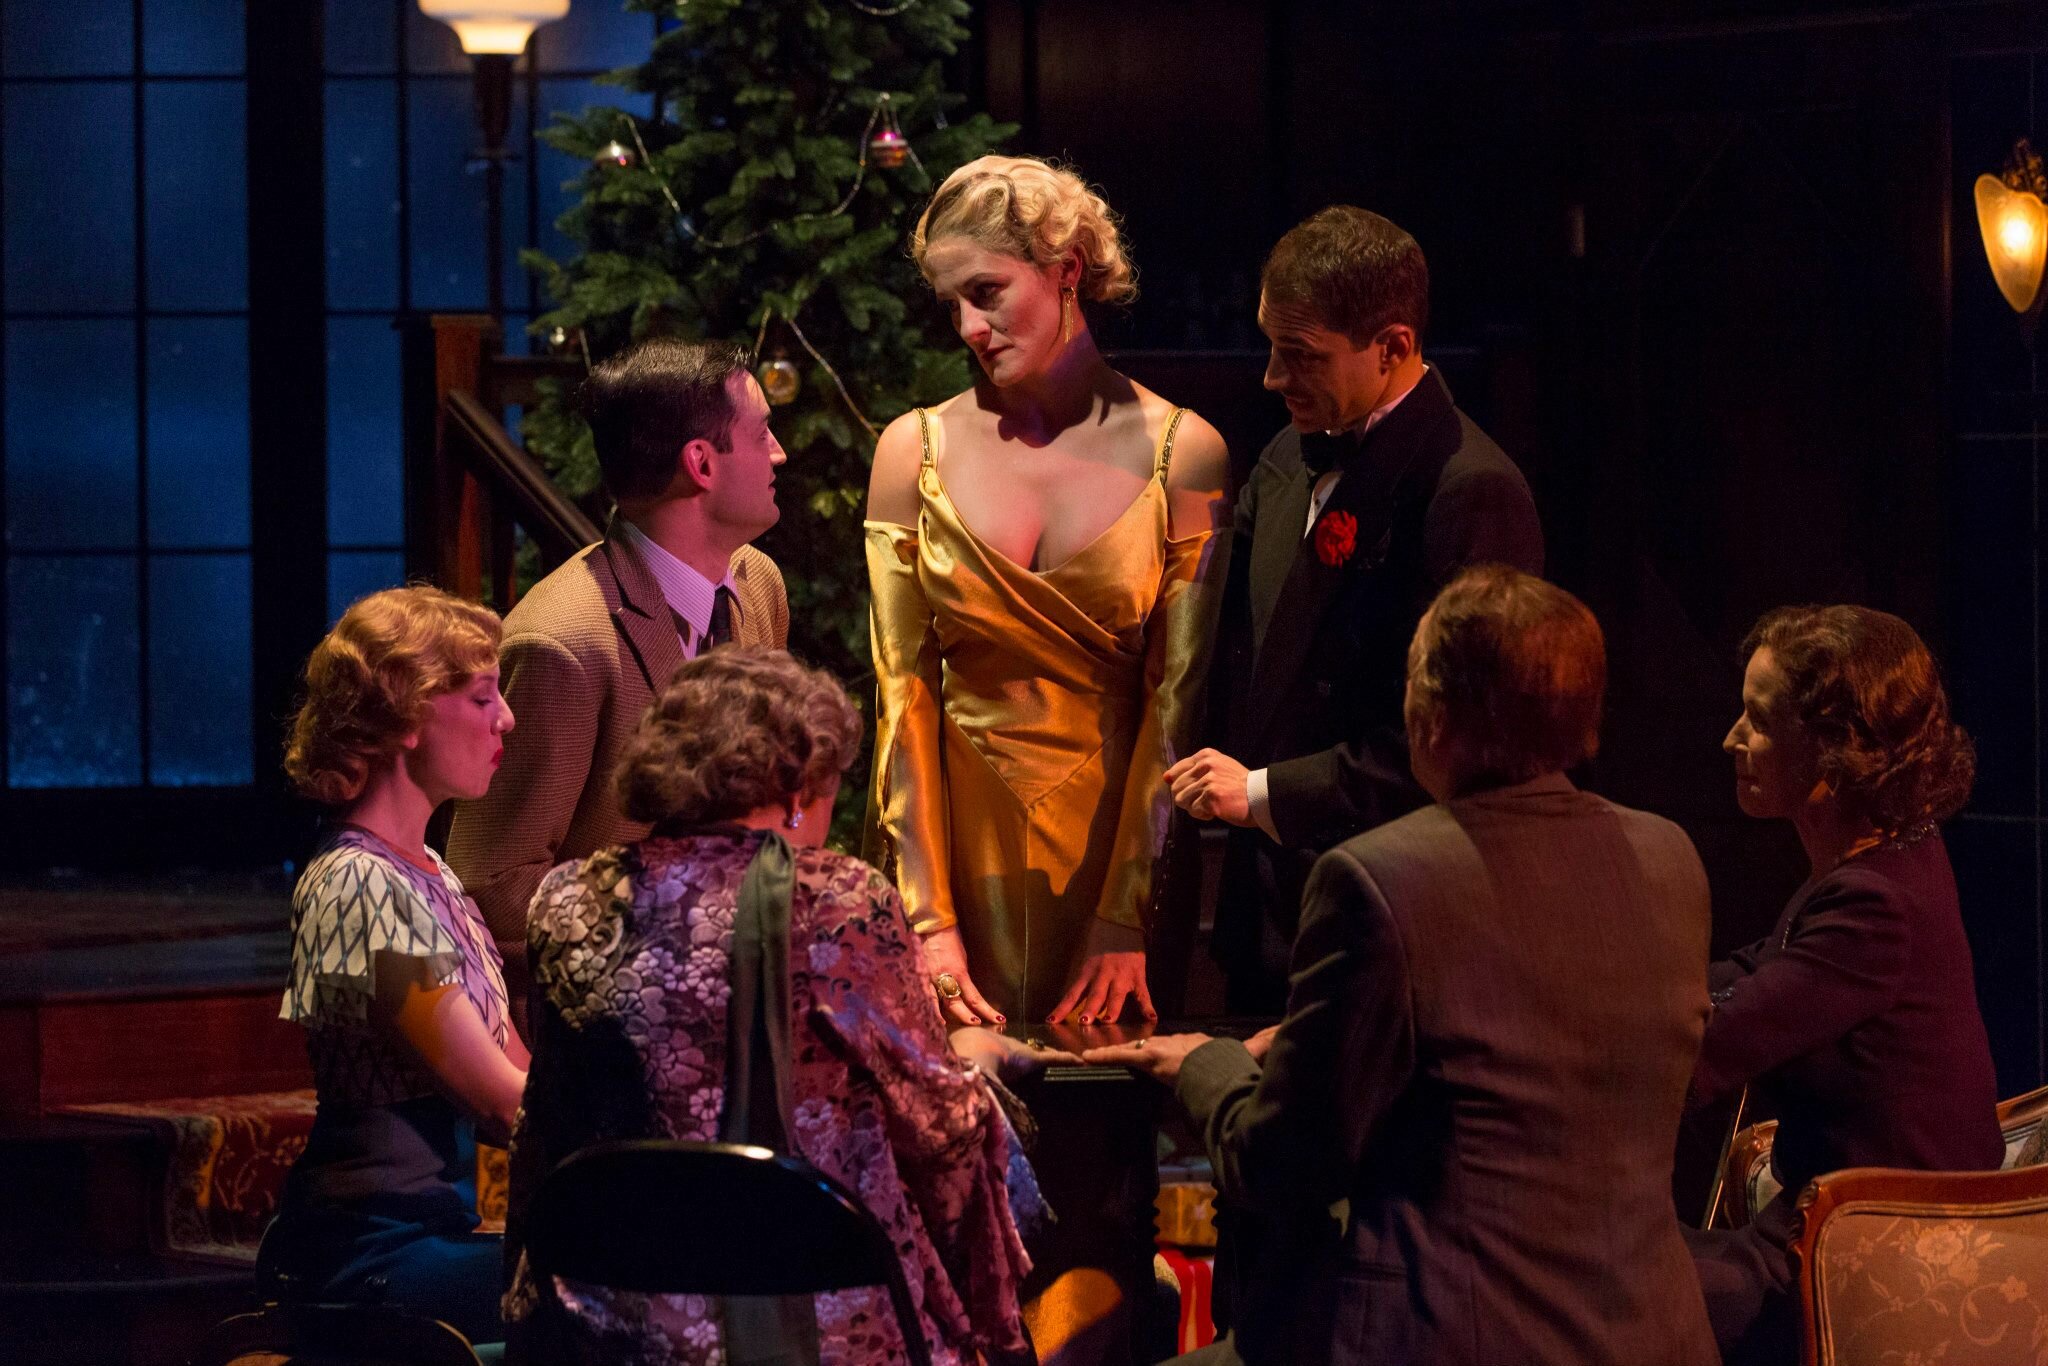  Daria Chase (Jennifer Johansen) leads the group in a pivotal séance in IRT’s “The Game’s Afoot”. Photo: Zach Rosing 